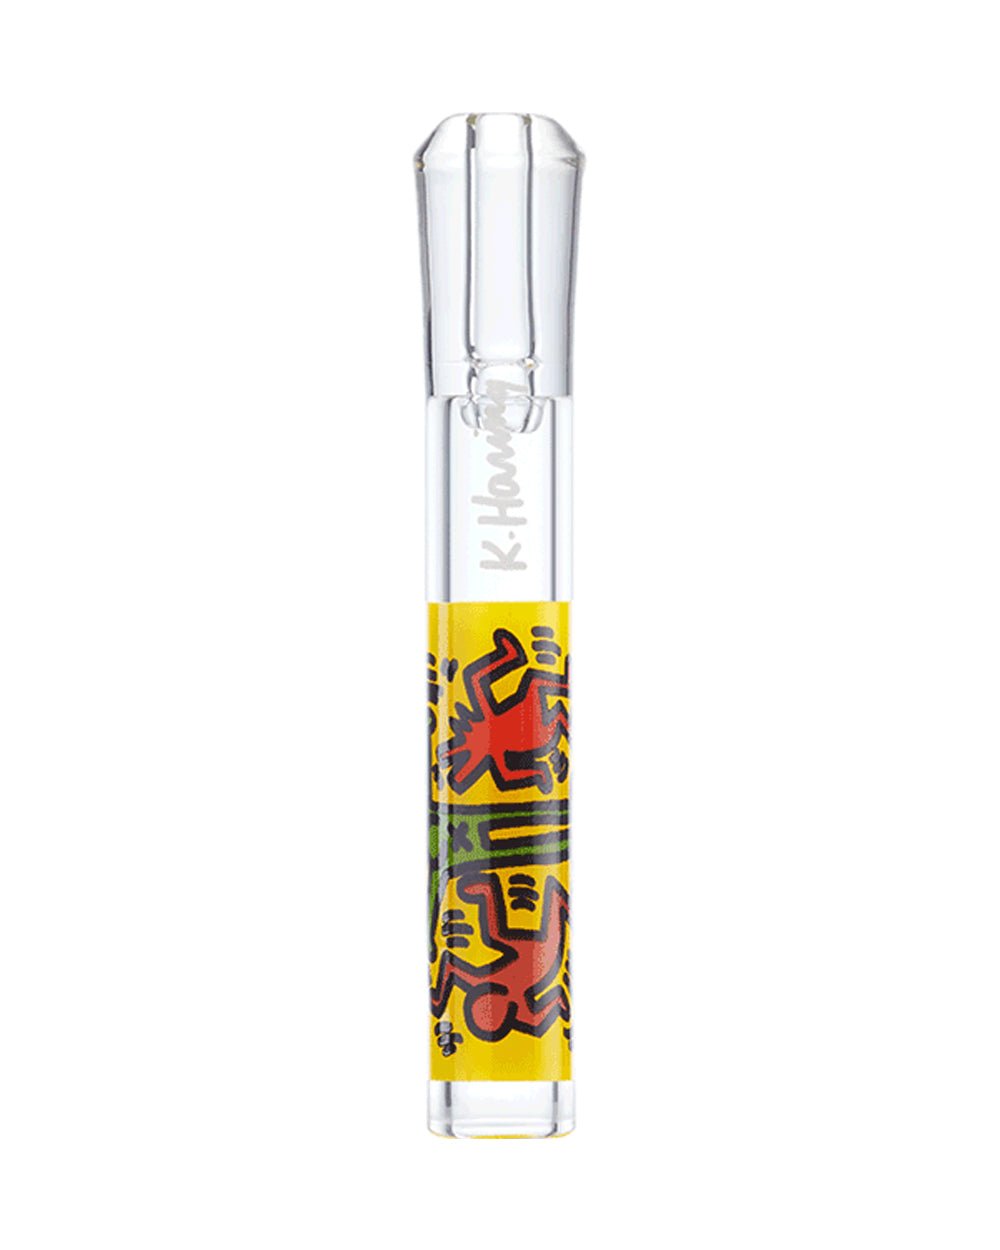 Keith Haring | Glass Taster Chillum Hand Pipe | 3in Long - Glass - Black & White - 7